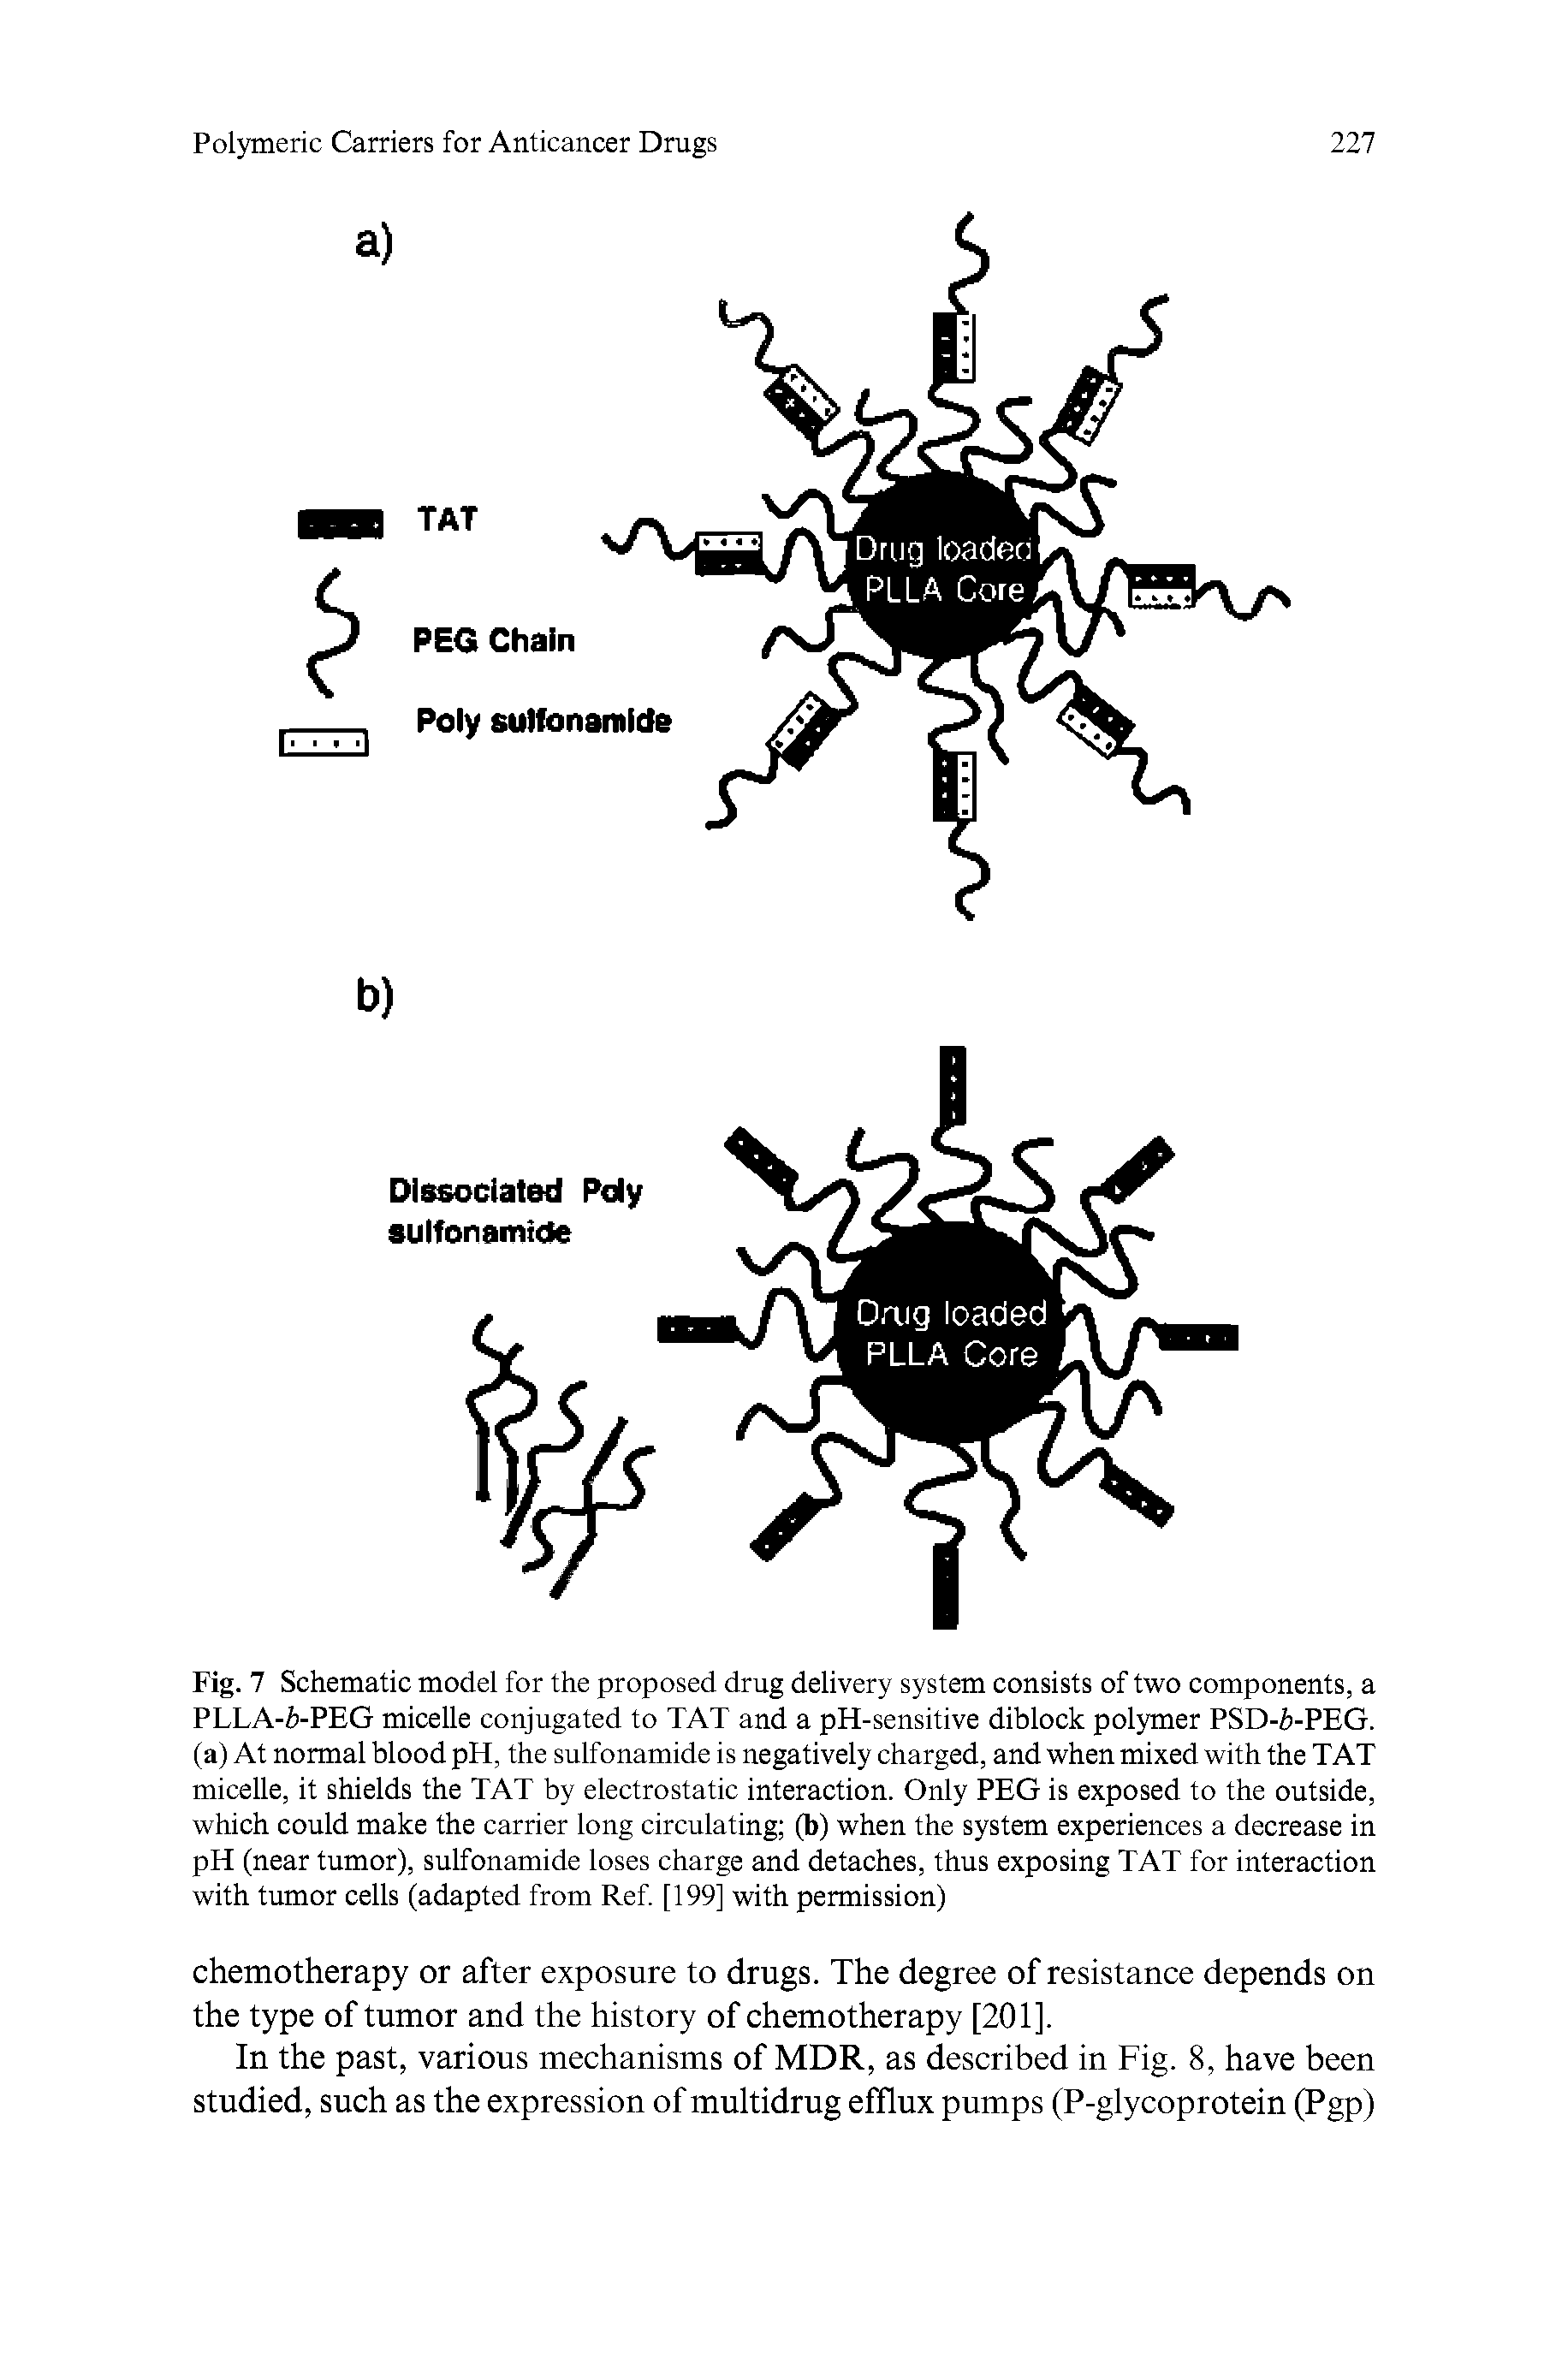 Fig. 7 Schematic model for the proposed drug delivery system consists of two components, a PLLA-h-PEG micelle conjugated to TAT and a pH-sensitive diblock polymer PSD-i-PEG. (a) At normal blood pH, the sulfonamide is negatively charged, and when mixed with the TAT micelle, it shields the TAT by electrostatic interaction. Only PEG is exposed to the outside, which could make the carrier long circulating (b) when the system experiences a decrease in pH (near tumor), sulfonamide loses charge and detaches, thus exposing TAT for interaction with tumor cells (adapted from Ref [199] with permission)...